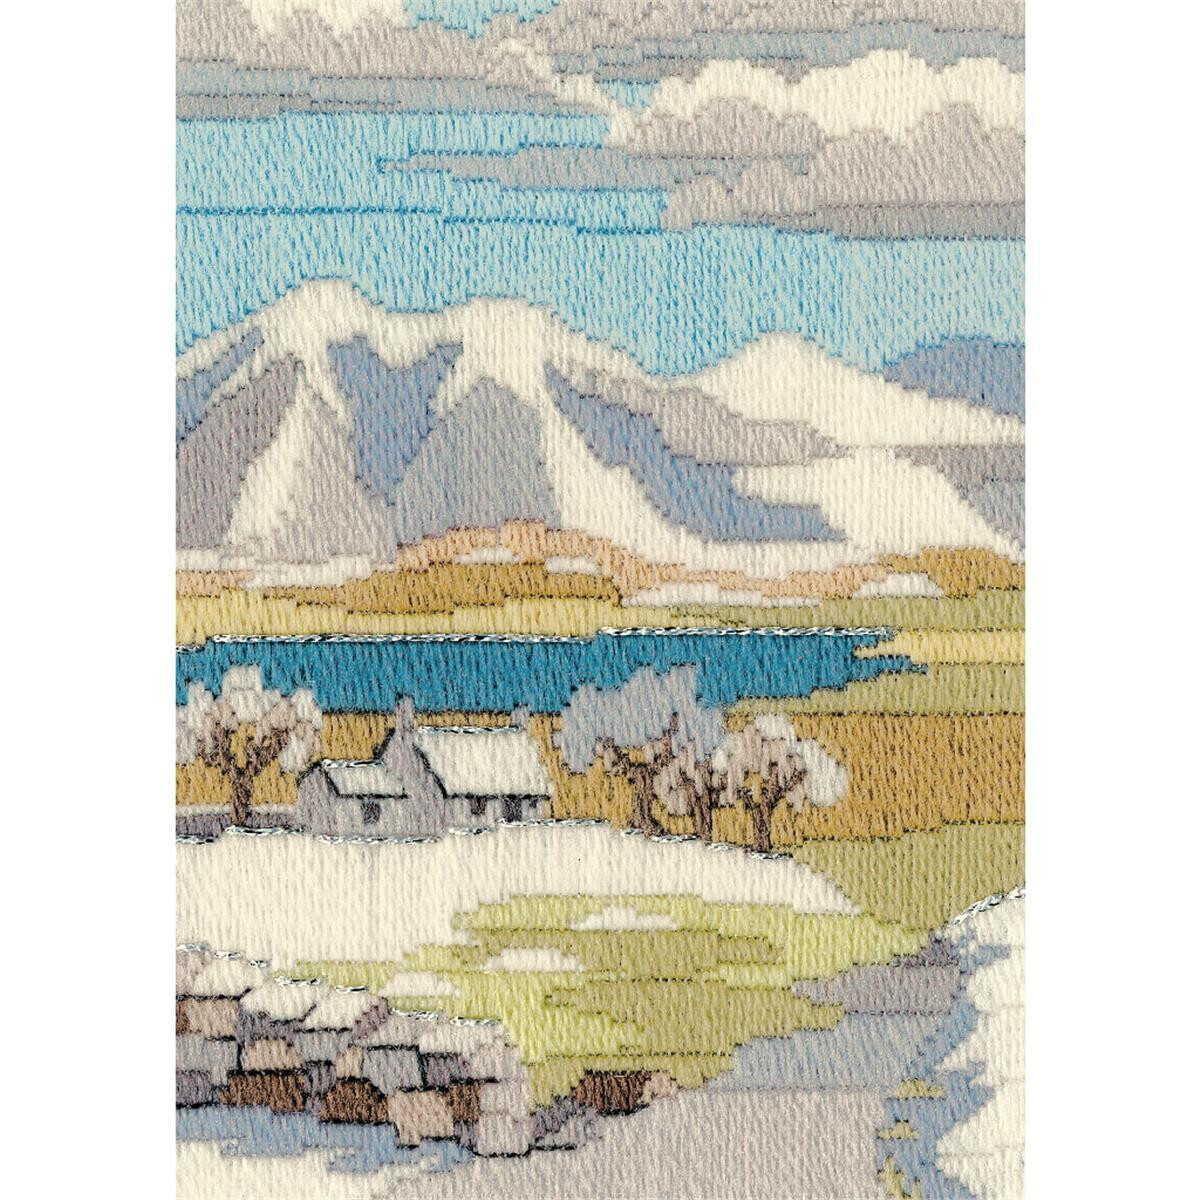 An intricately stitched picturesque landscape features...